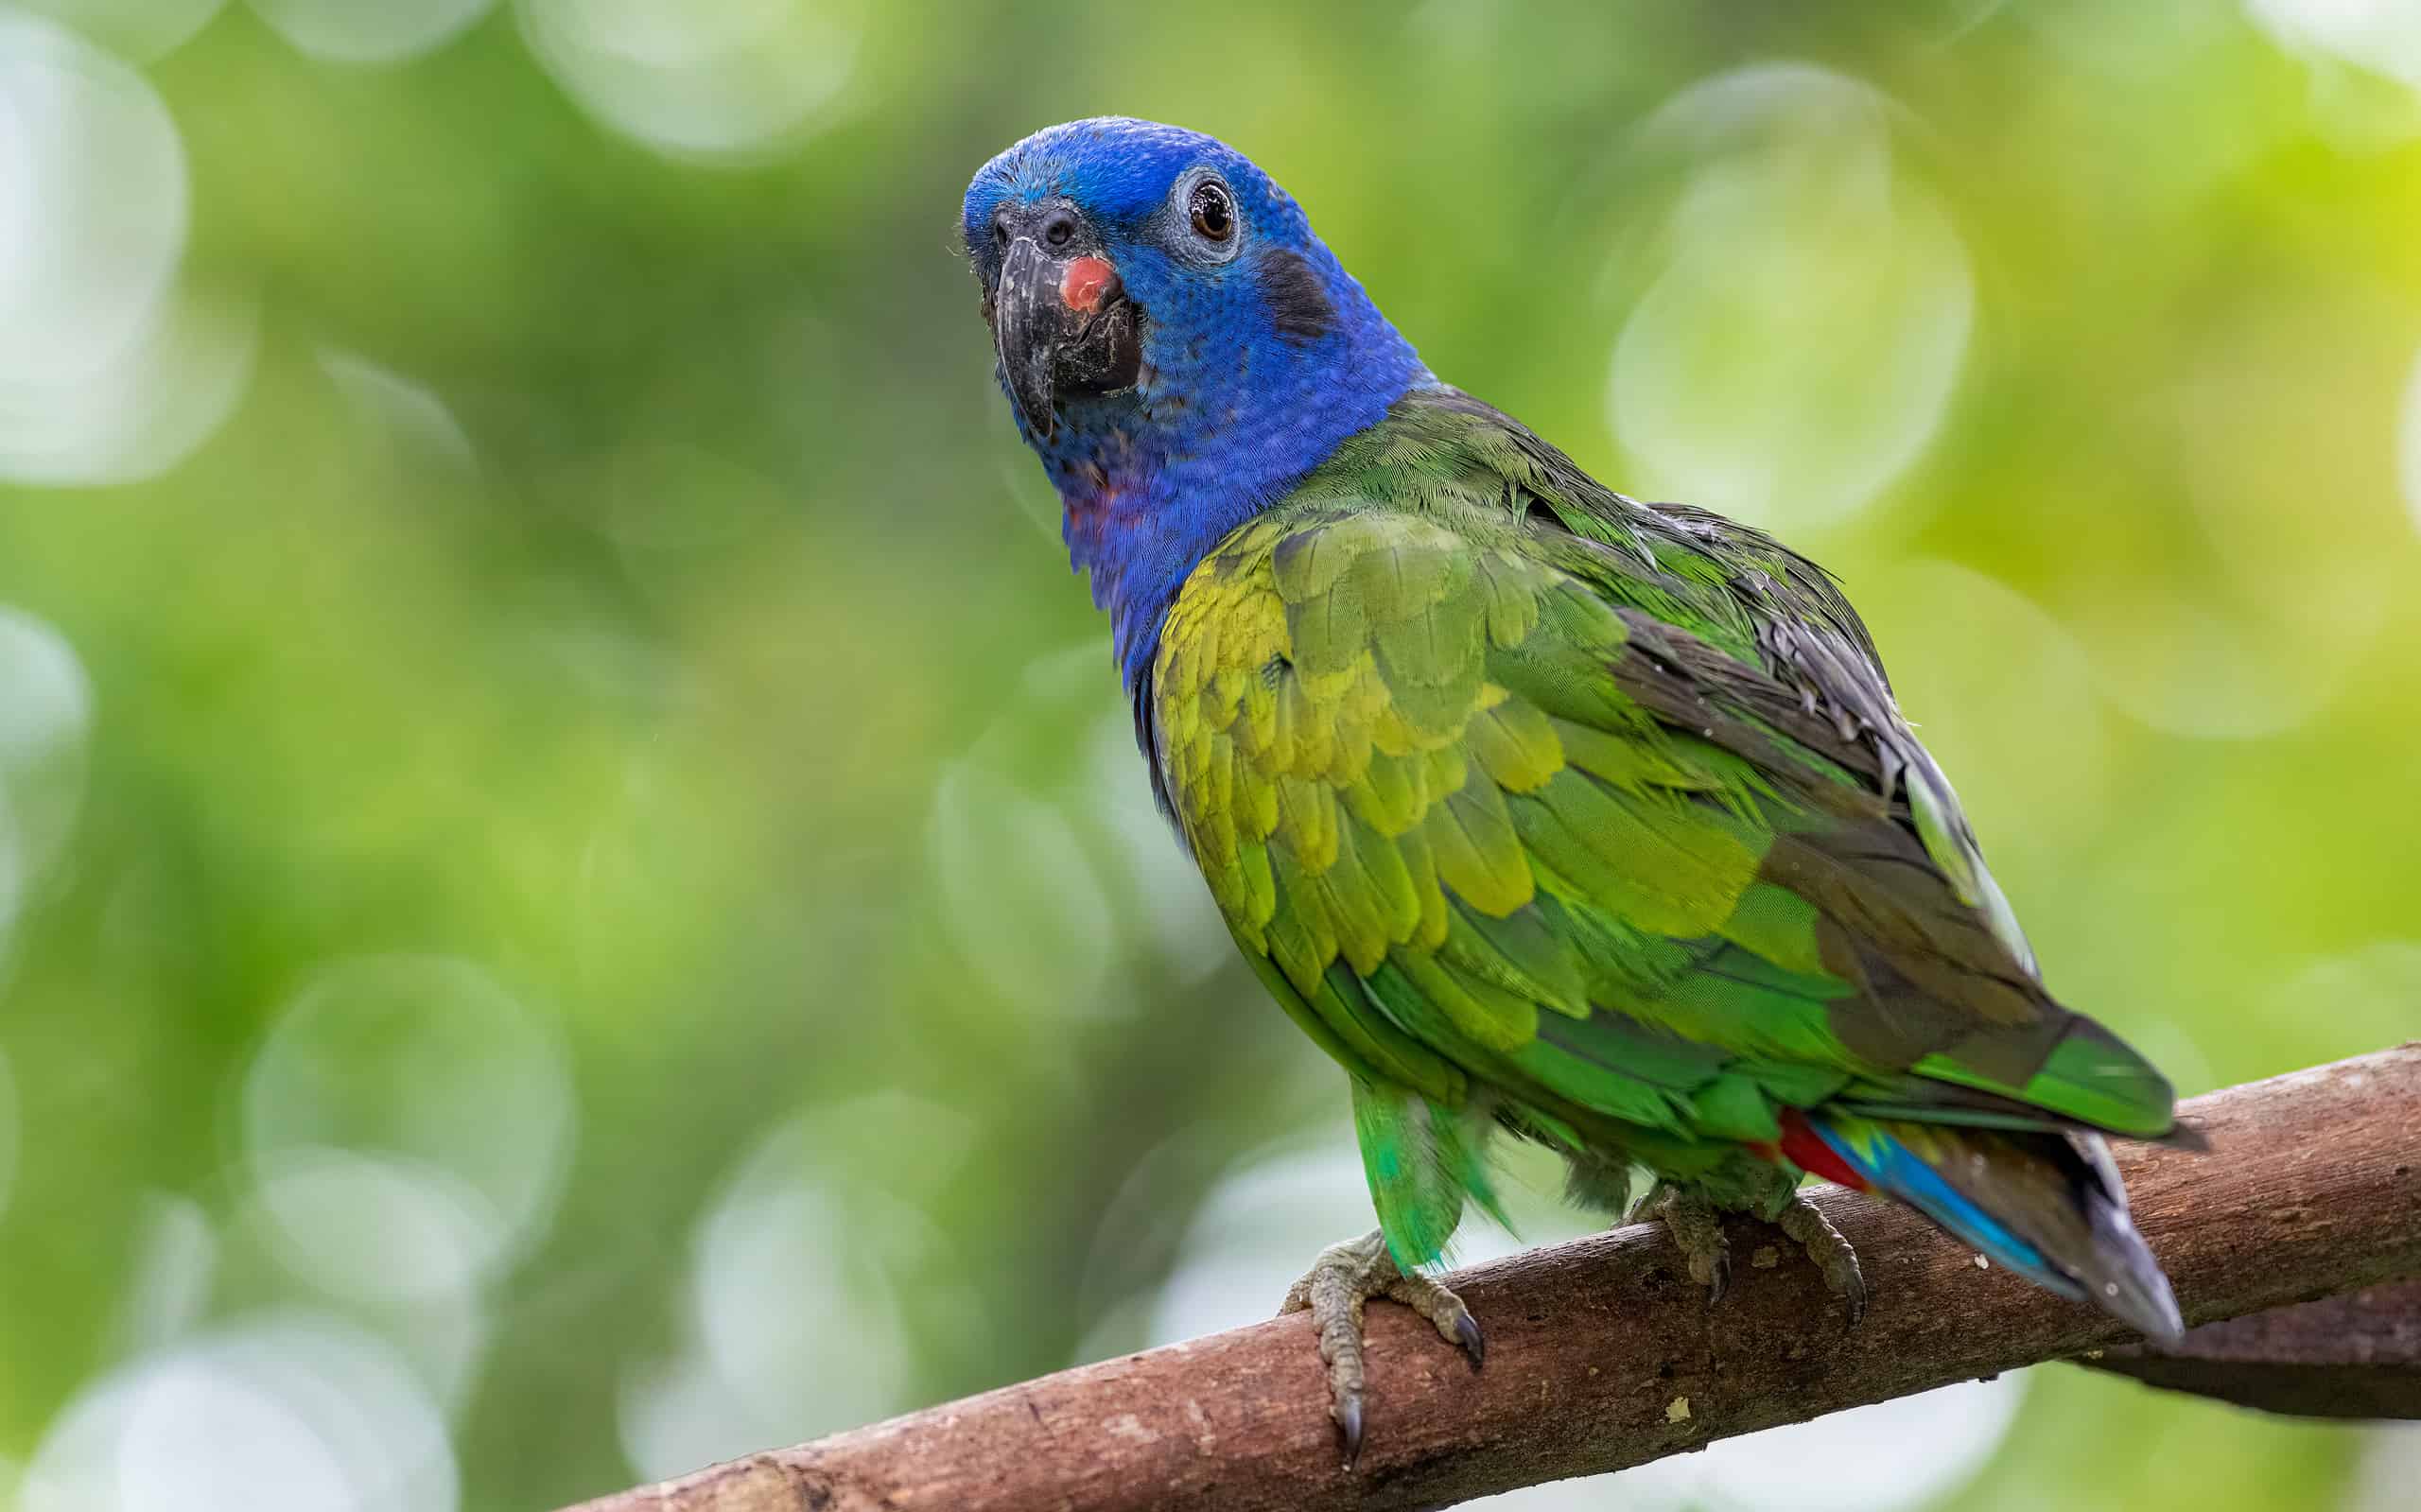 Blue-headed Parrot (Pionus menstruus). Beautiful parrot perched on a tree trunk with an out of focus background